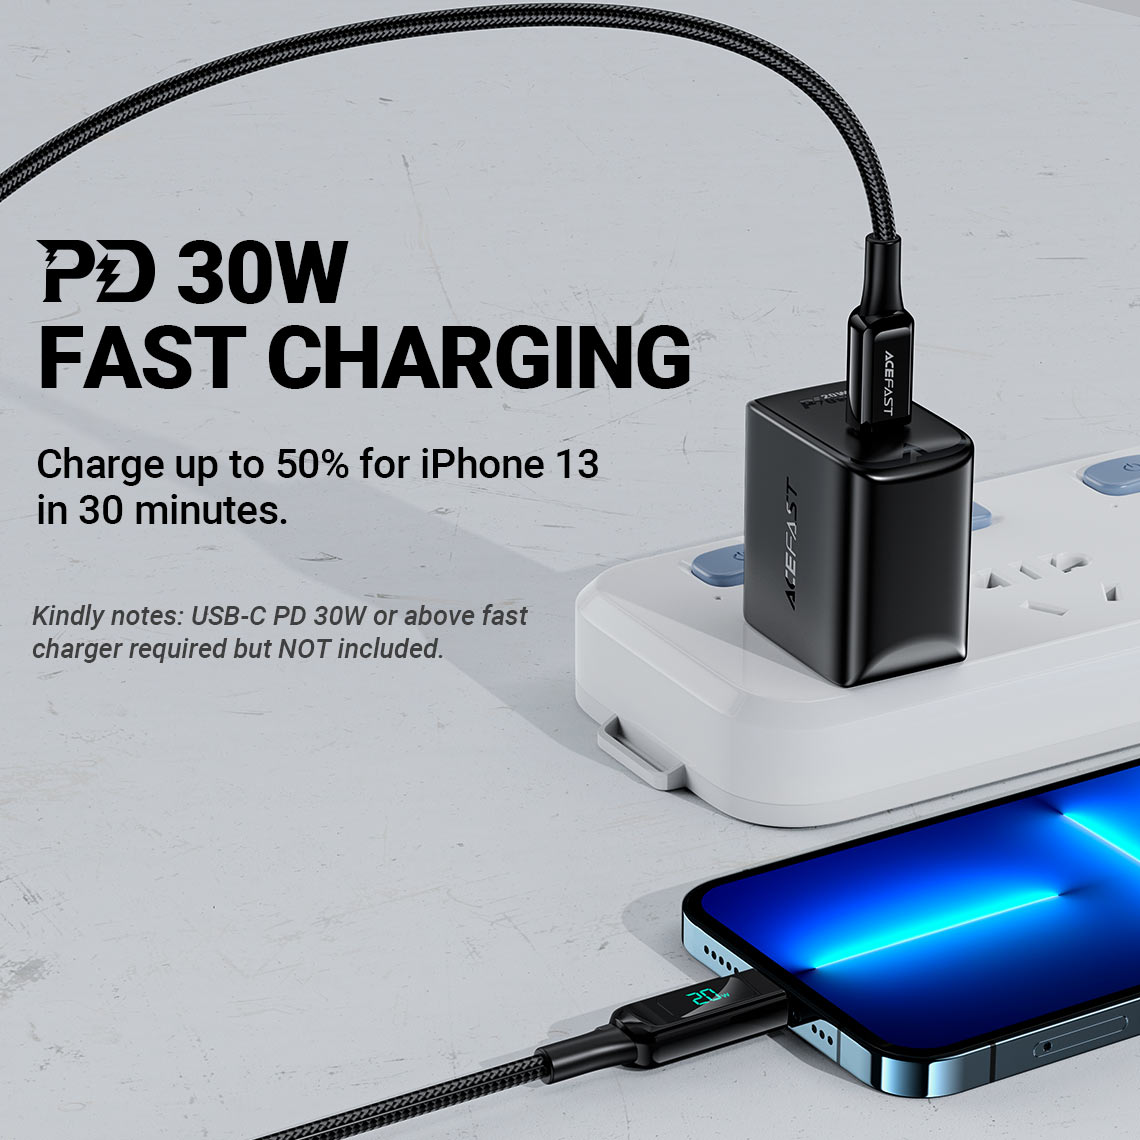 acefast-c6-01-usbc-to-lightning-charging-data-cable-pd-20w-fast-charging